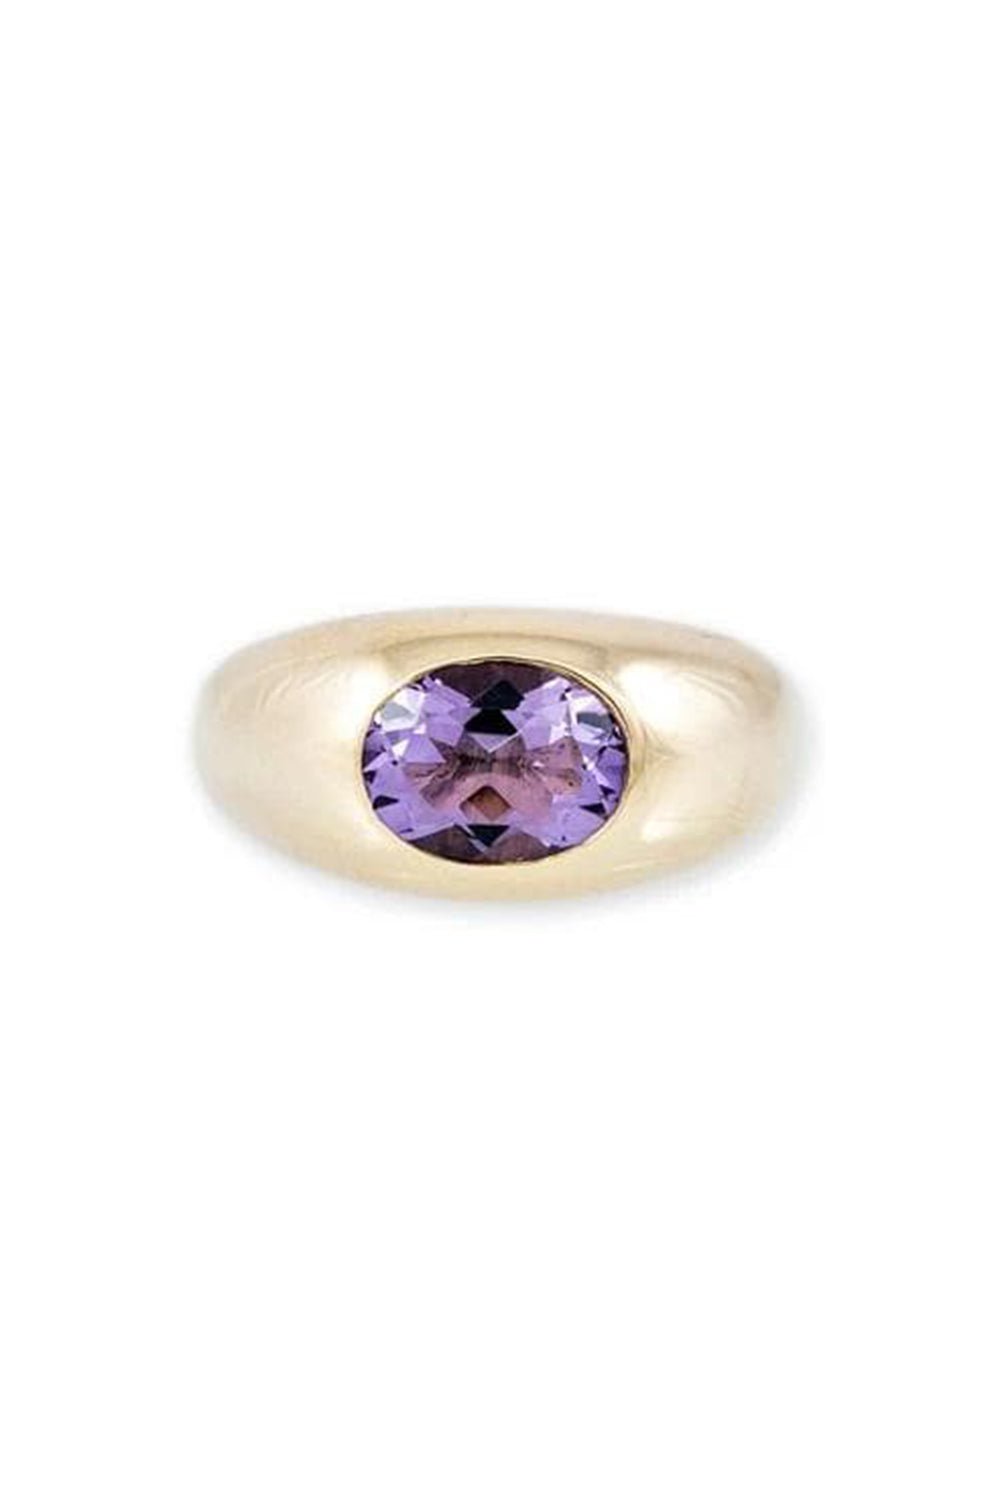 JACQUIE AICHE-Medium Amethyst Dome Ring-YELLOW GOLD